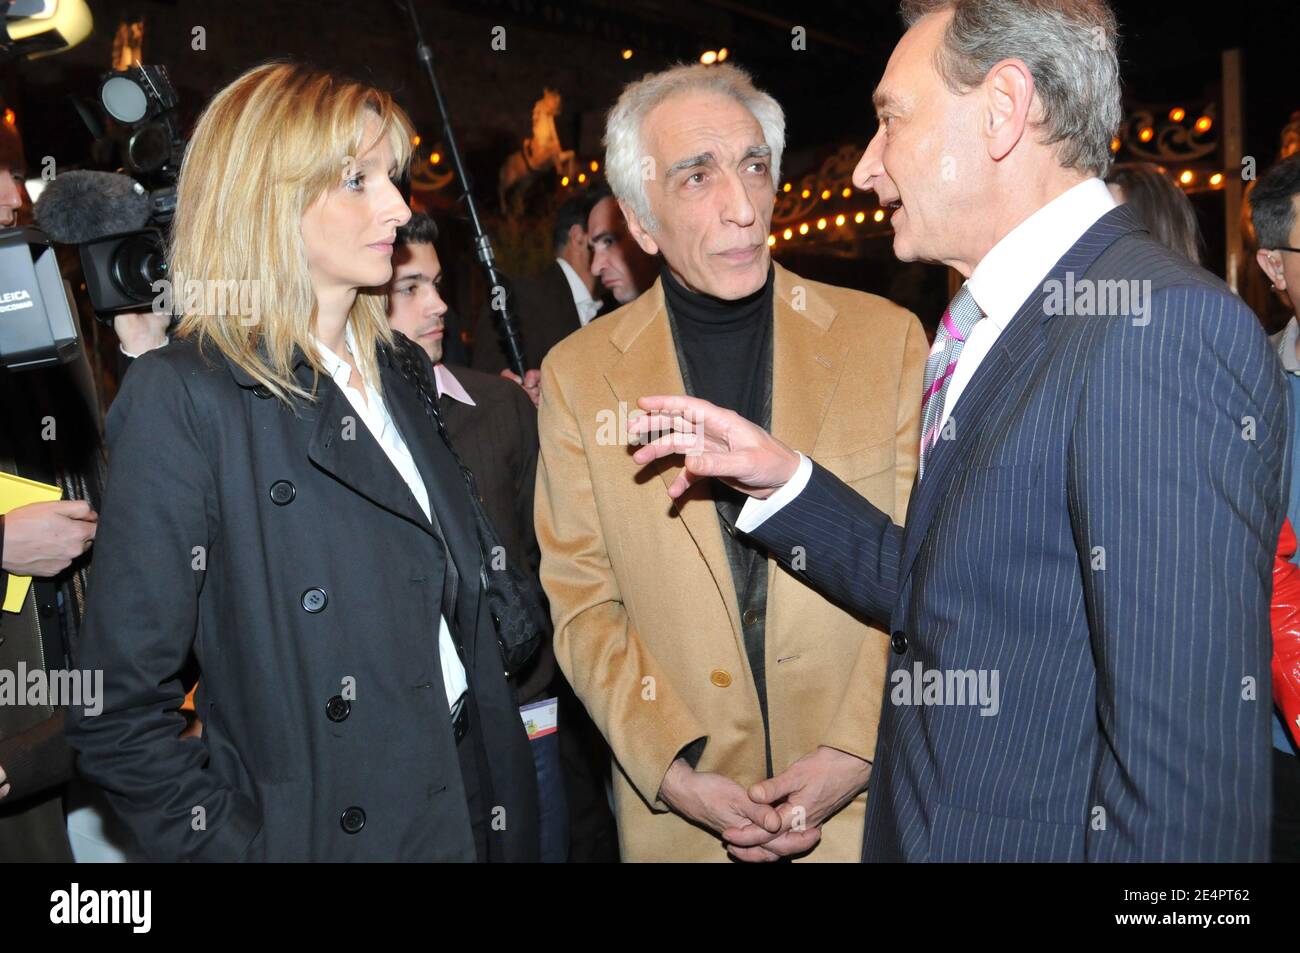 Paris Mayor Bertrand Delanoe and French actor Gerard Darmon and his girlfriend seen during a meeting to support Bertrand Delanoe for mayoral elections at the 'Musee des Arts Forains' in Paris, France, on February 18, 2008. Photo by Ammar Abd Rabbo/ABACAPRESS.COM Stock Photo